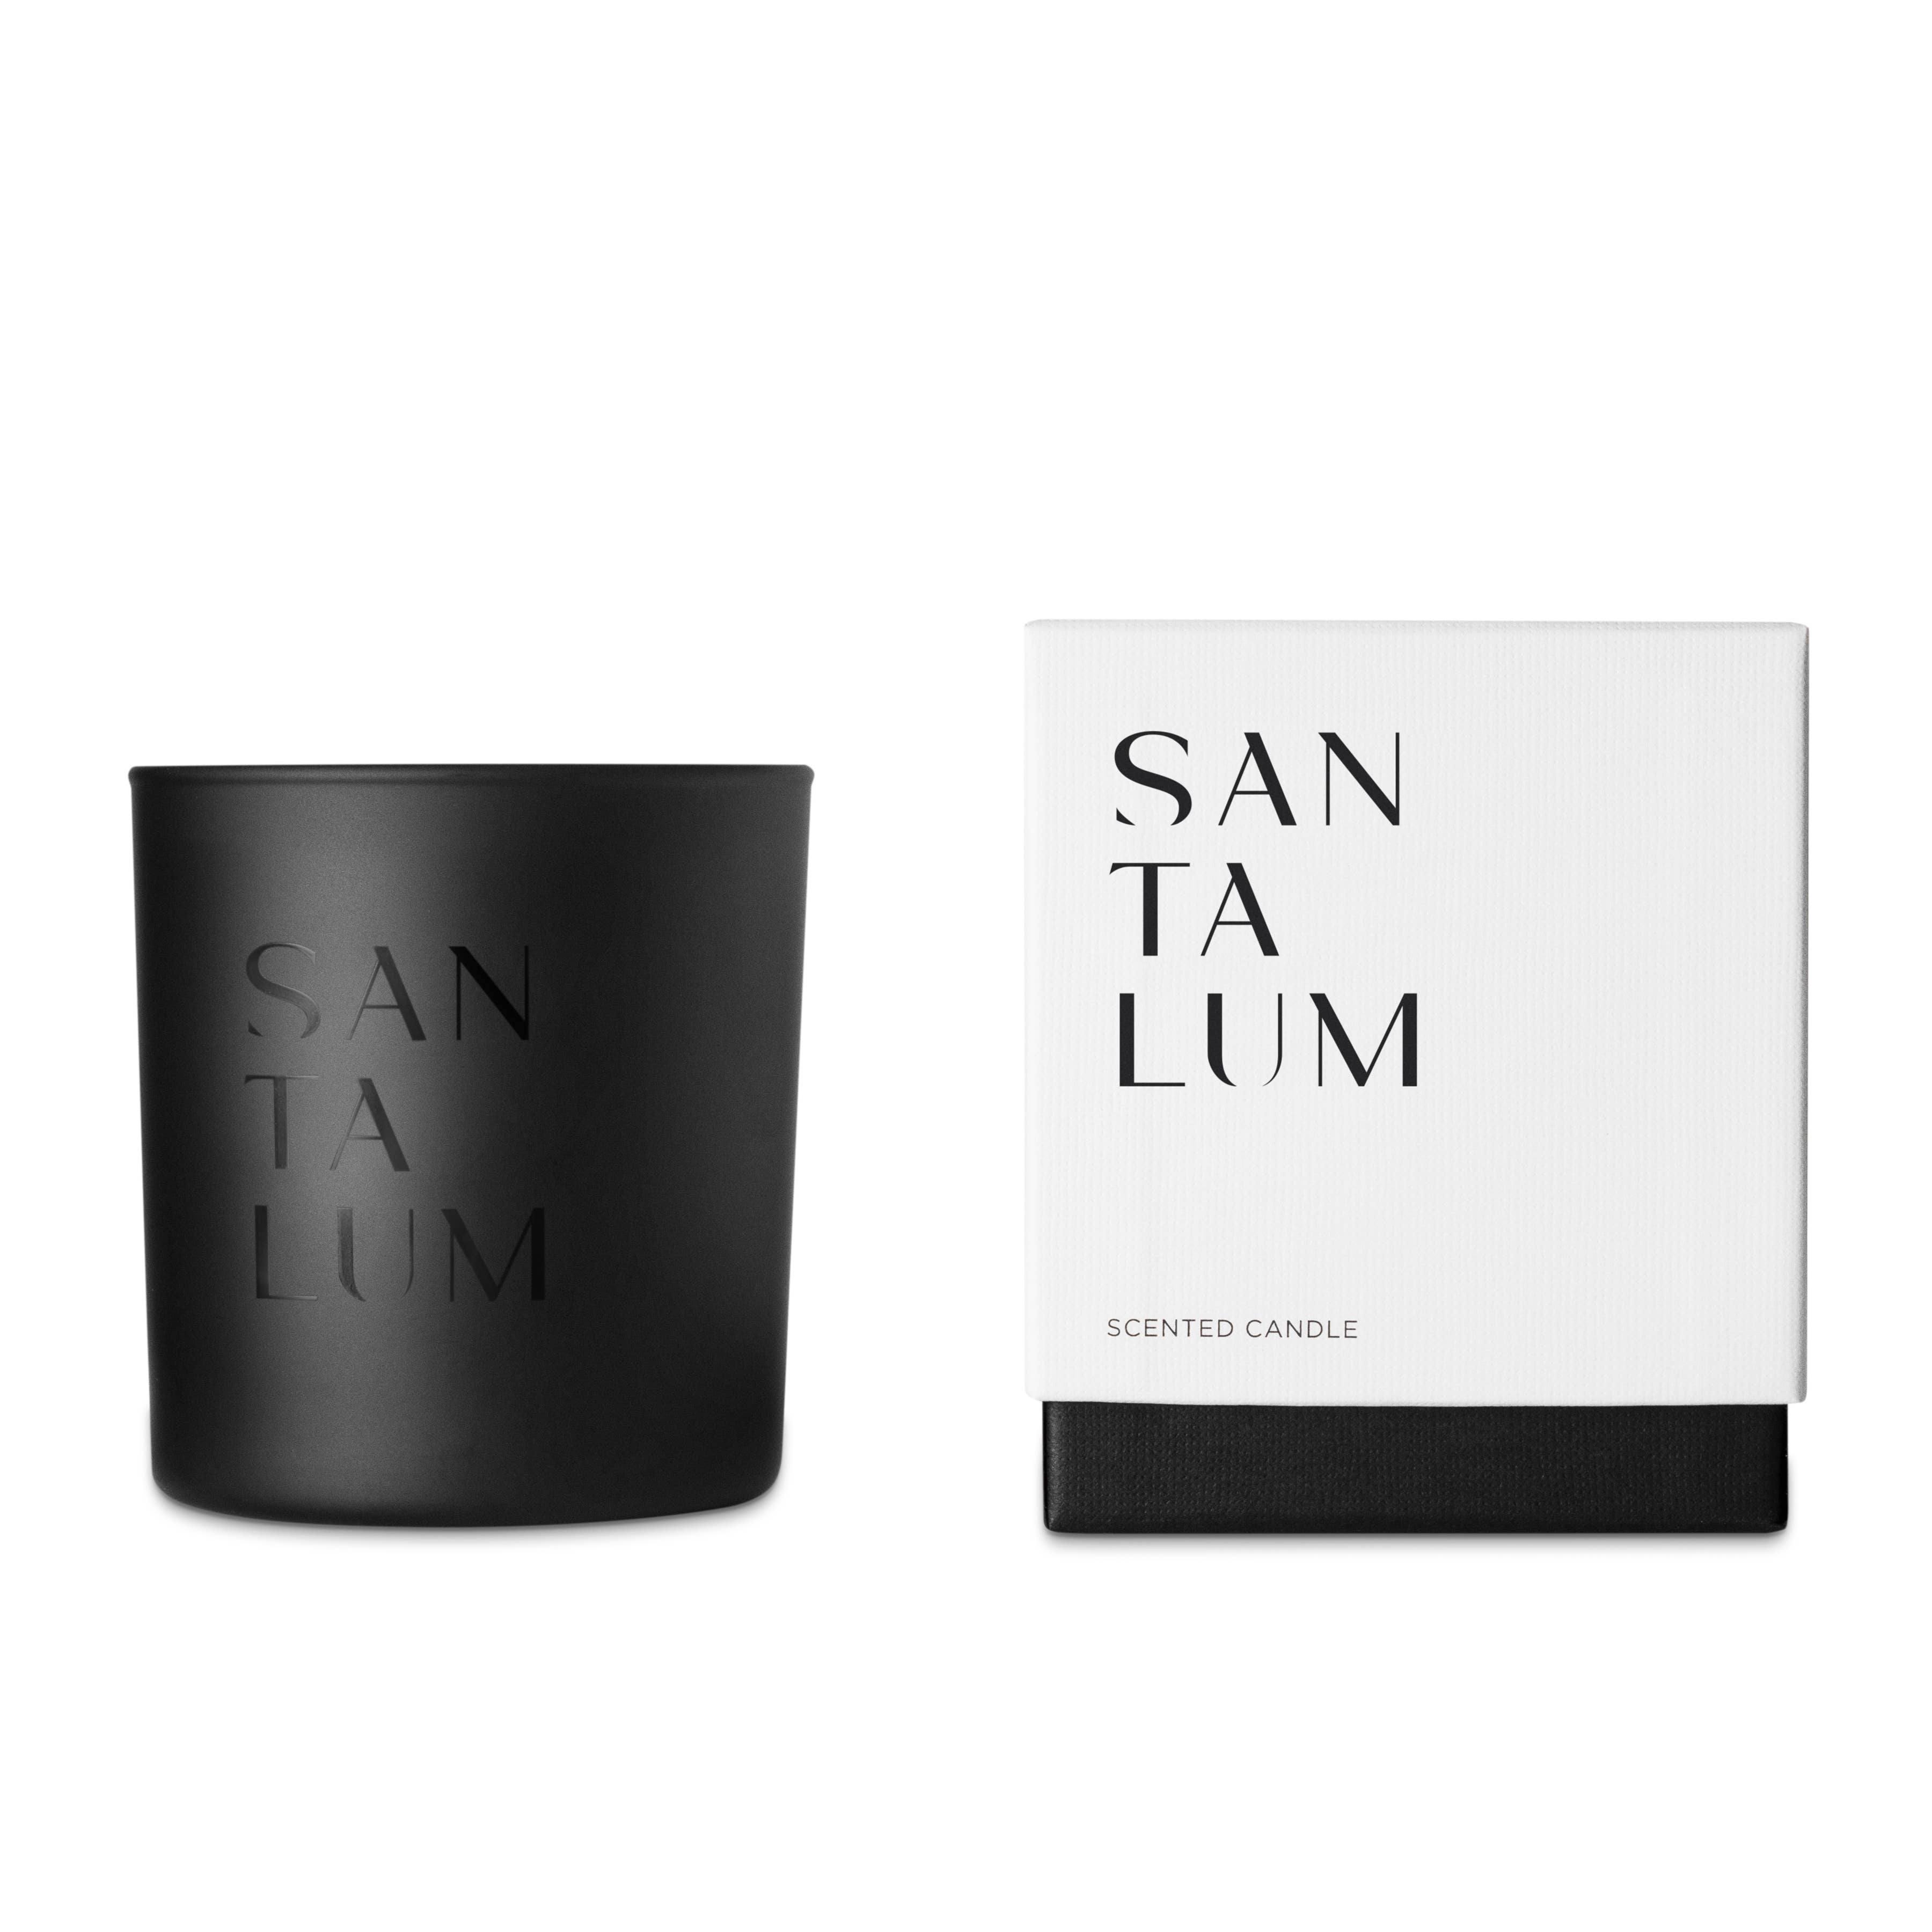 black glass candle and white box that says santalum